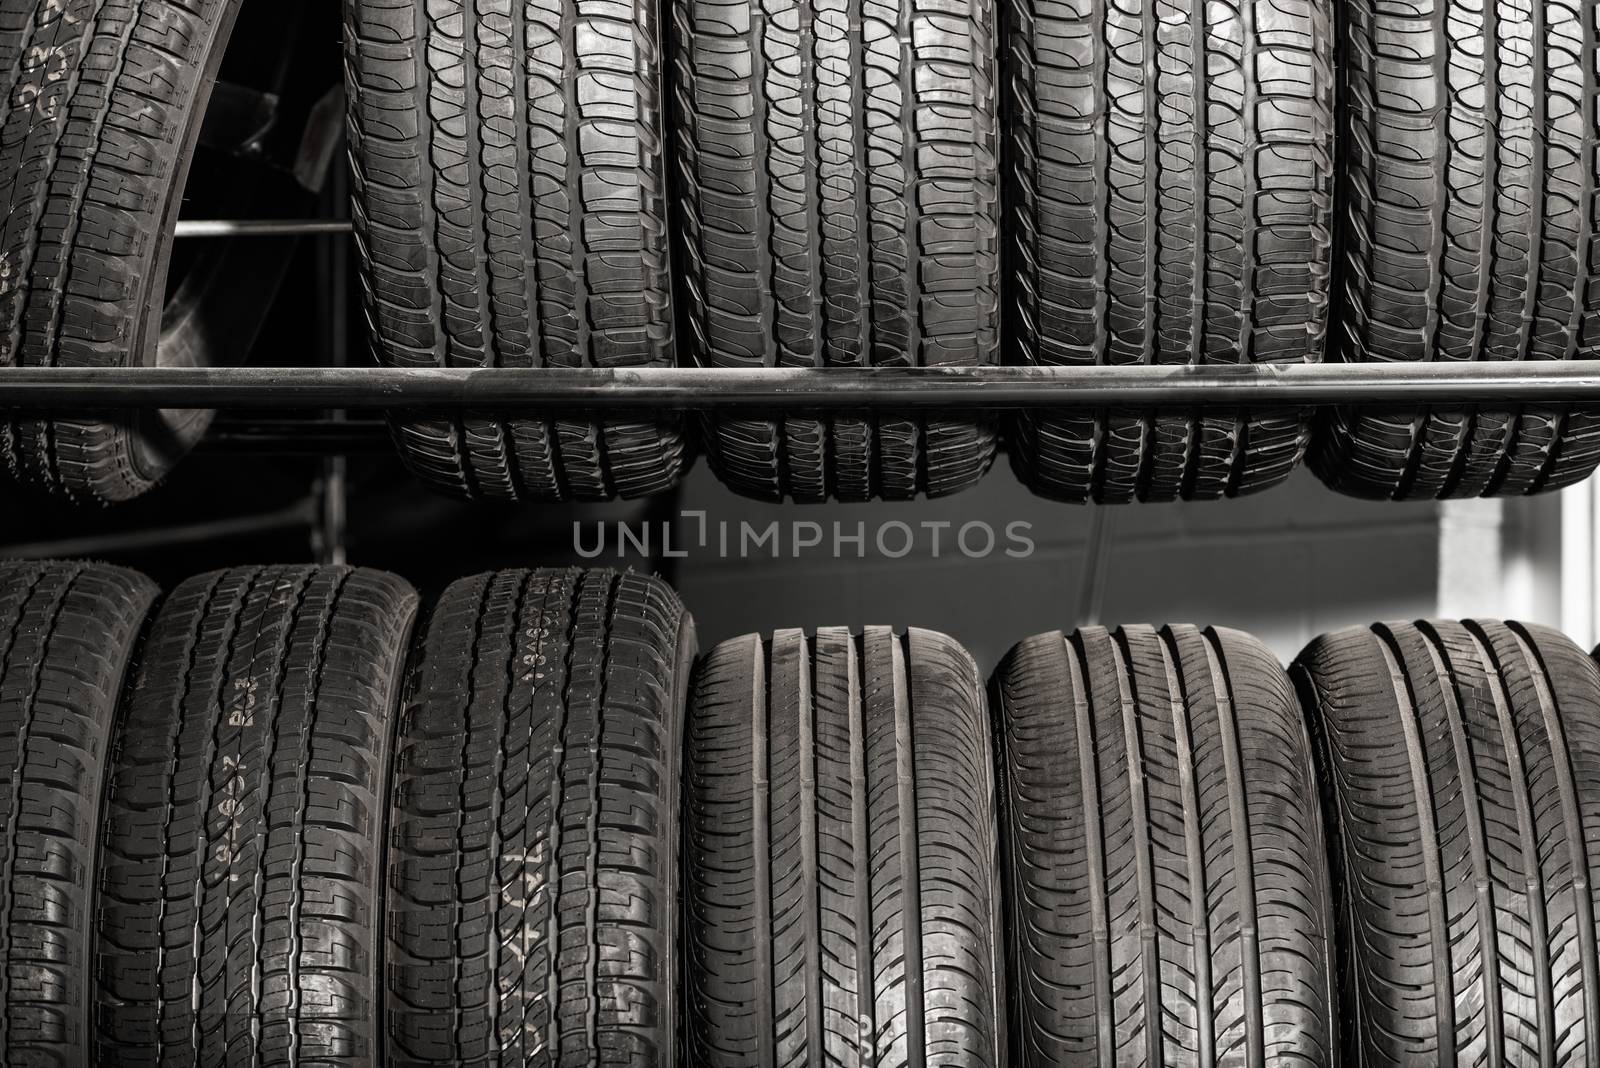 Tires Rack Tire Sales by welcomia